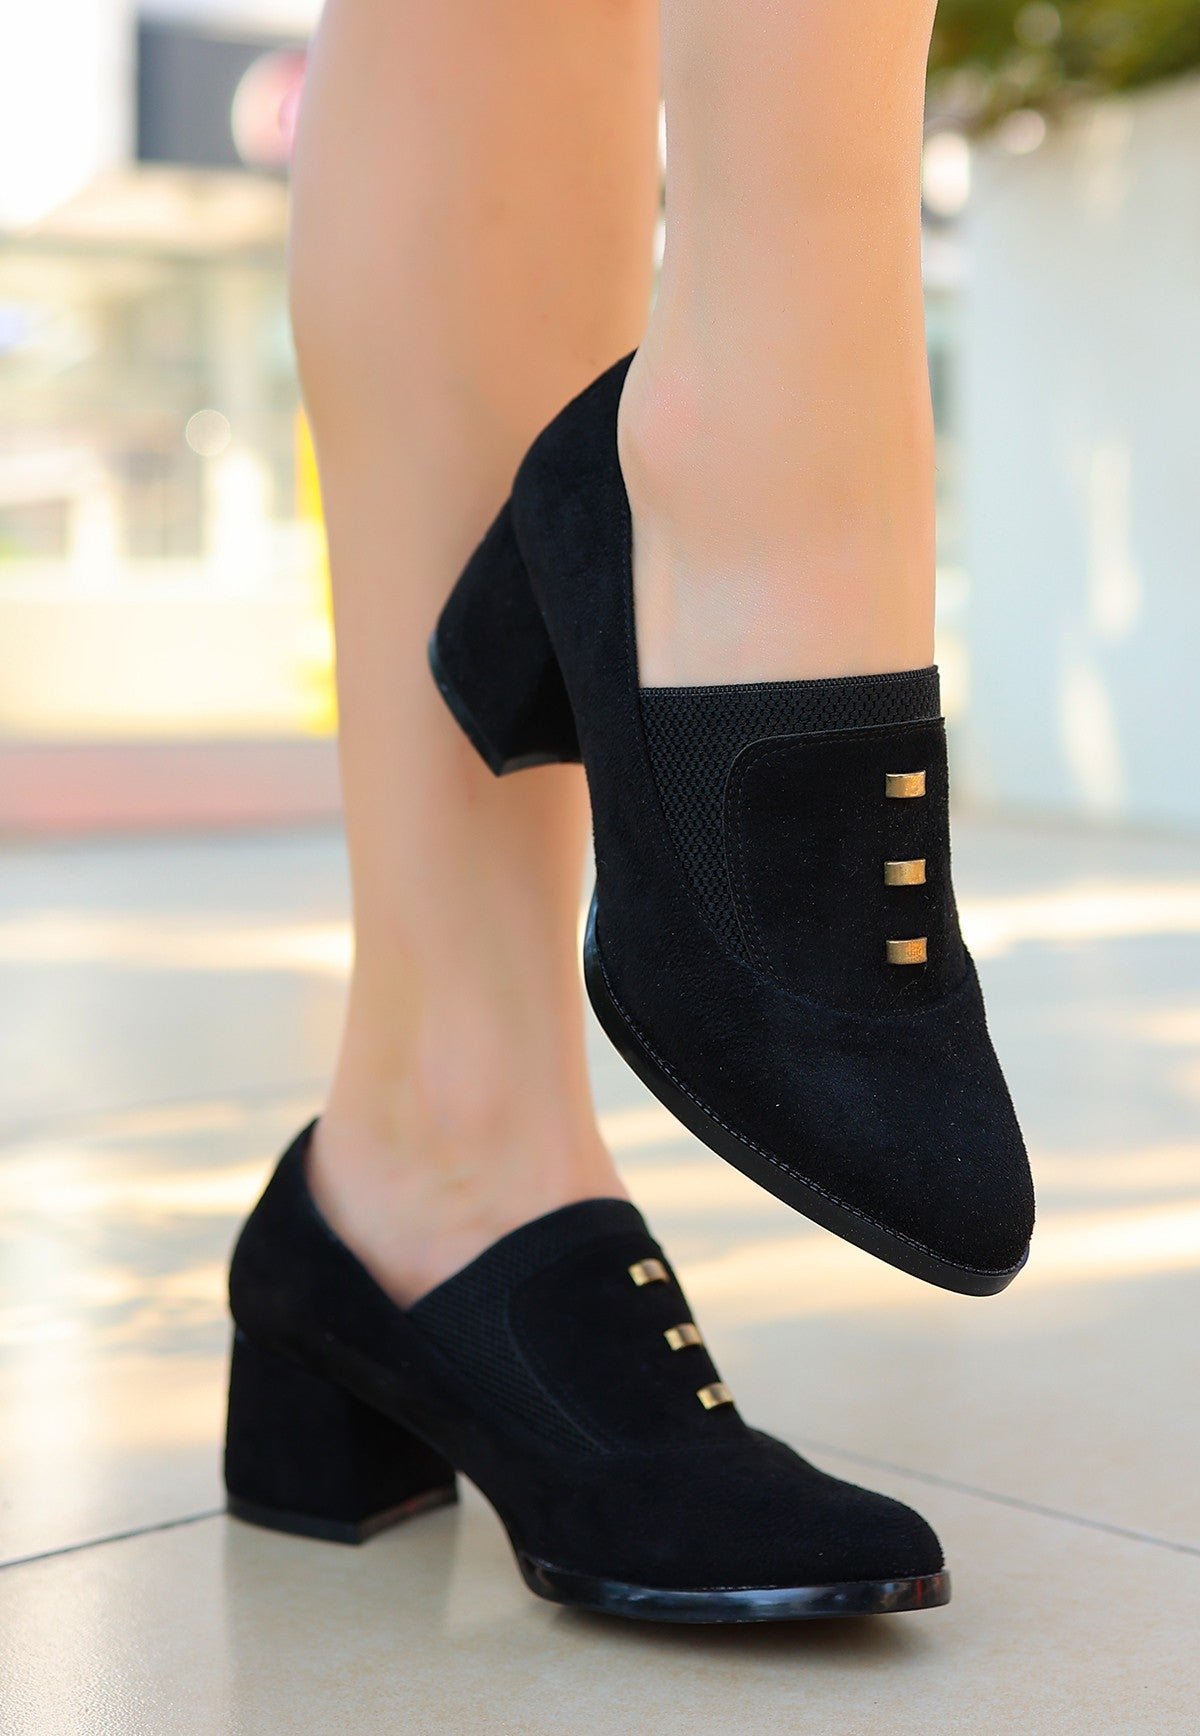 Women's Black Suede Heeled Shoes - STREETMODE™